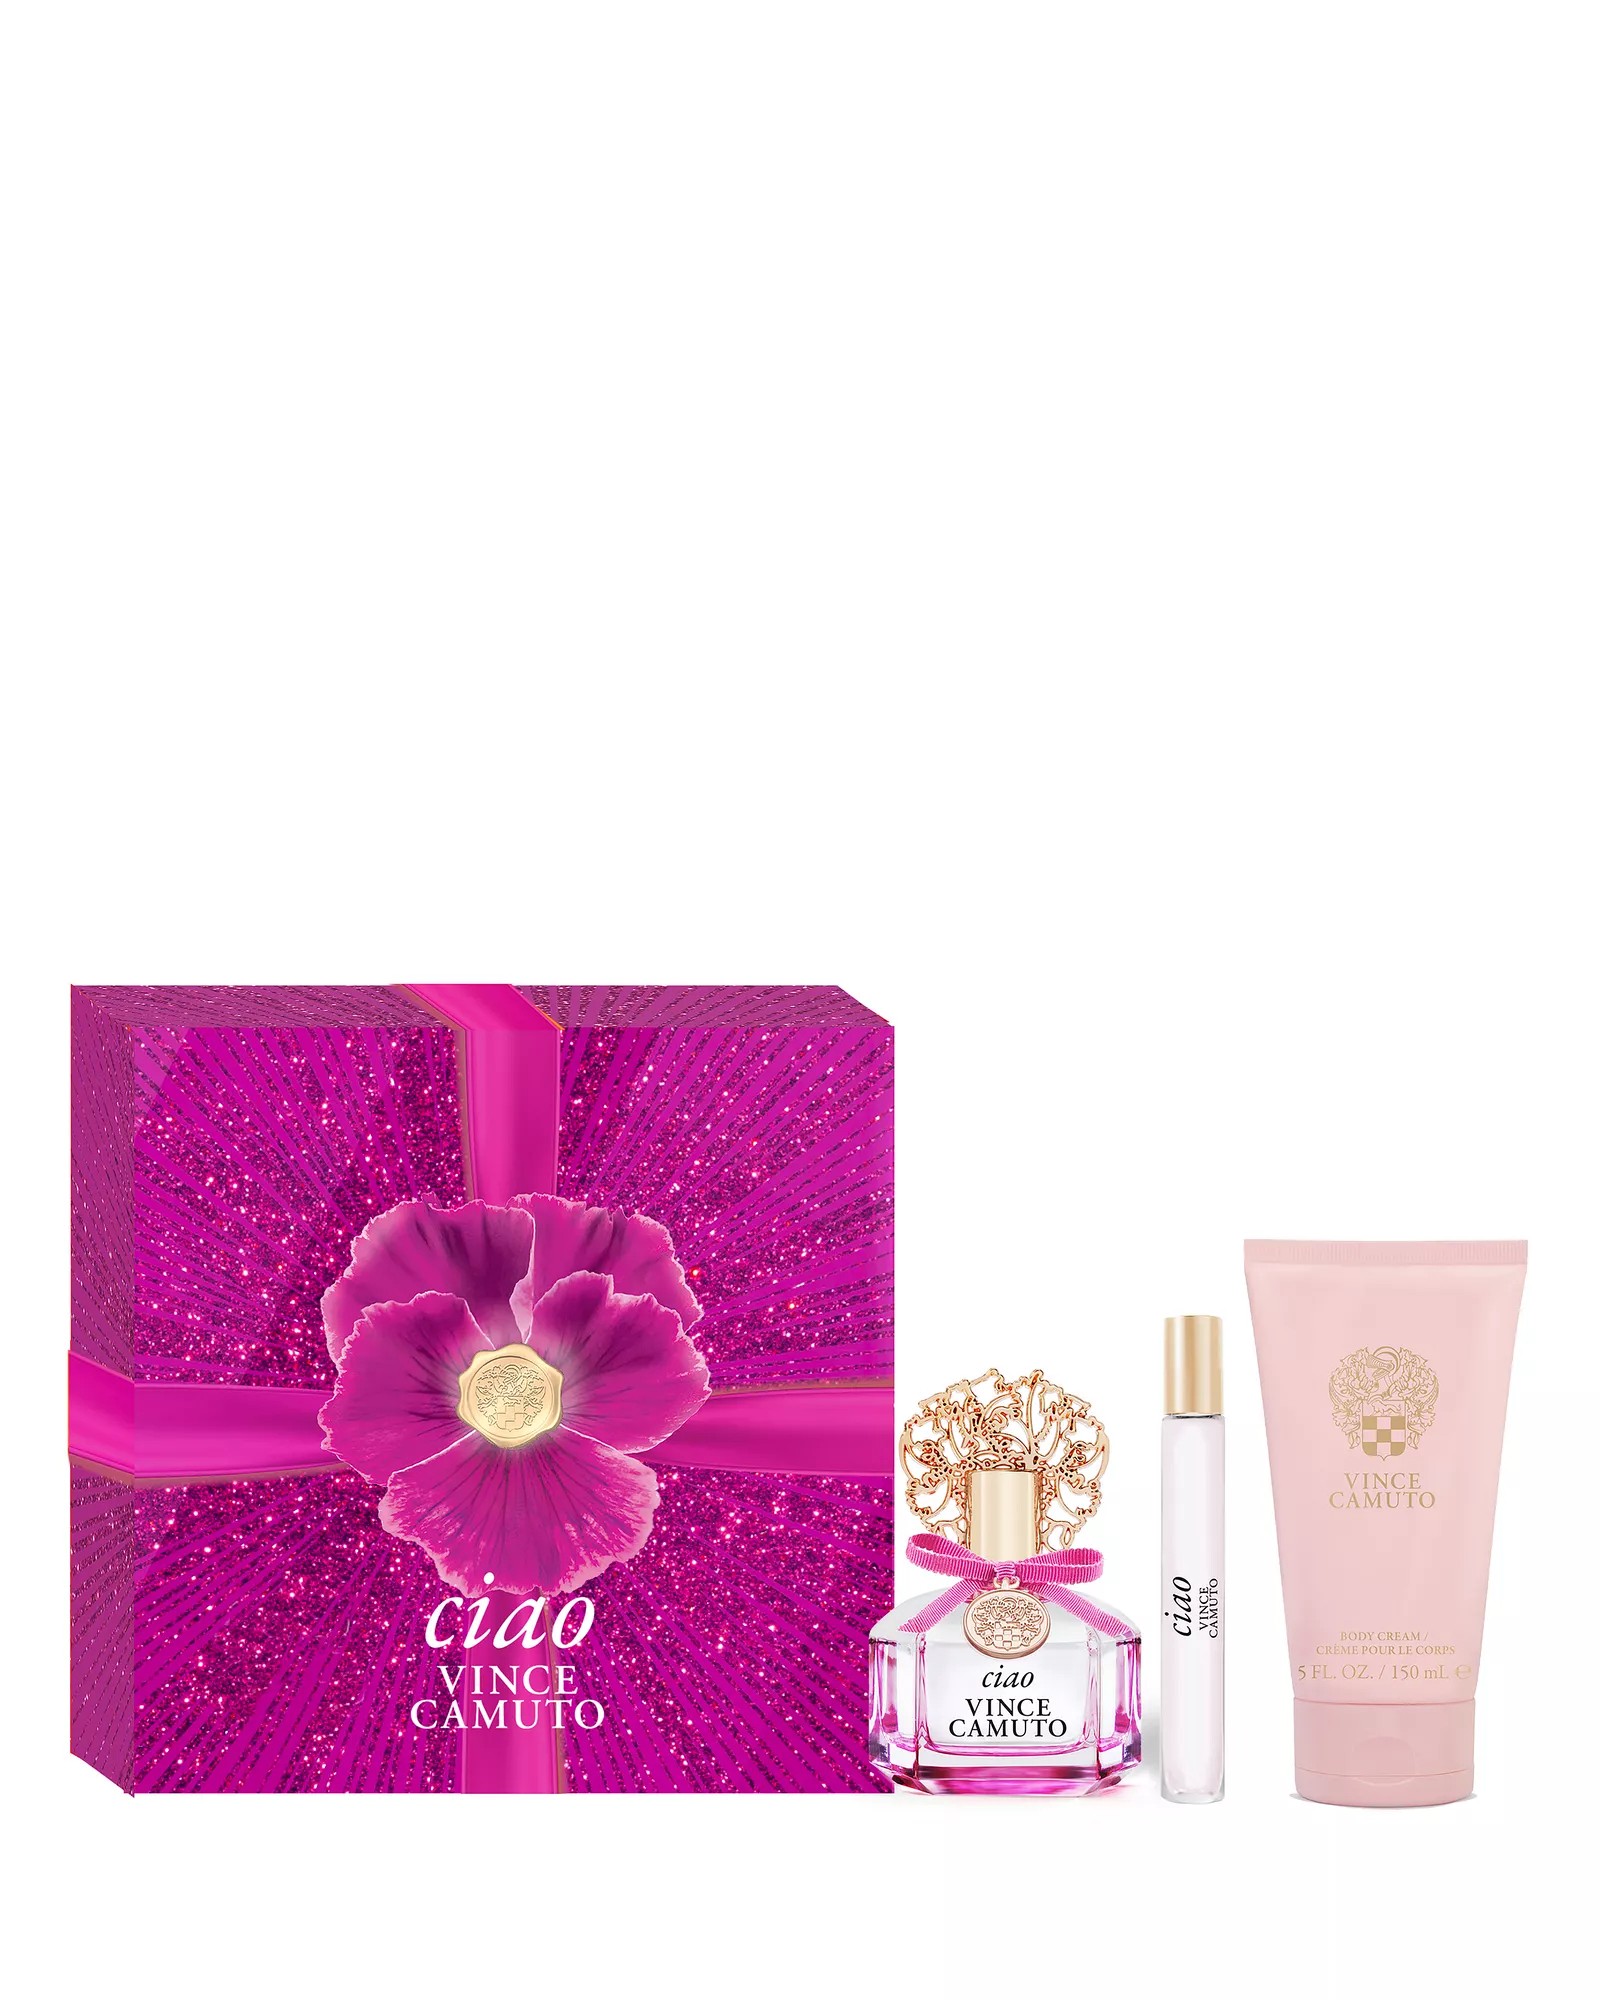 Vince Camuto Ciao Vince Camuto 3-Piece Gift Set